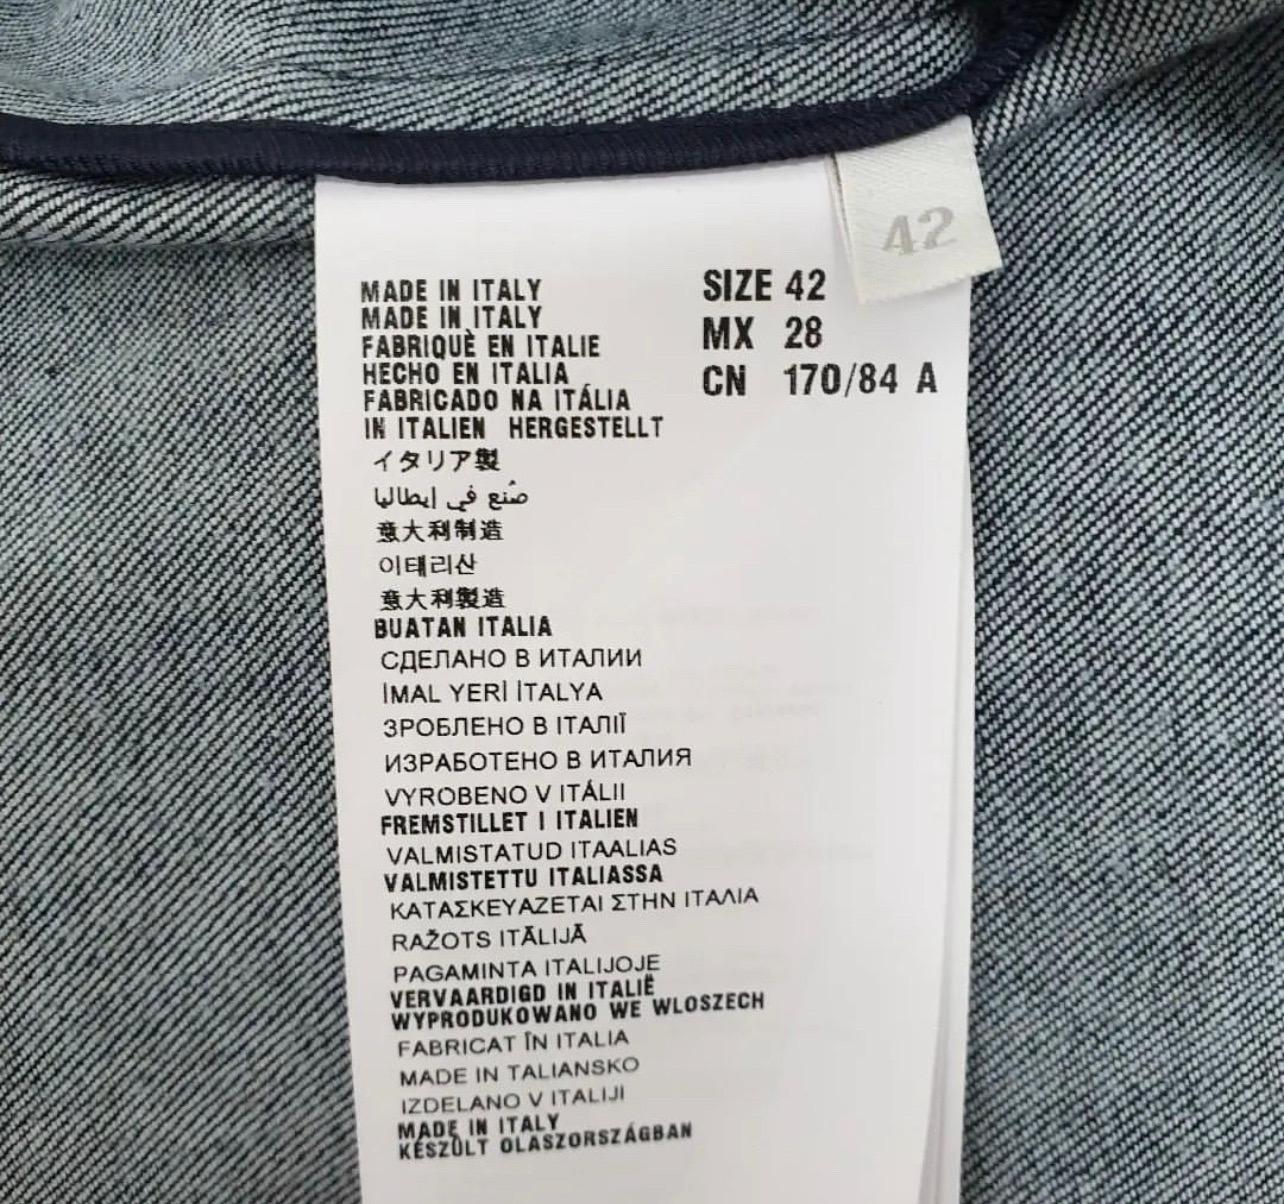 Miu Miu Denim Leather Jacket  In Good Condition For Sale In Krakow, PL